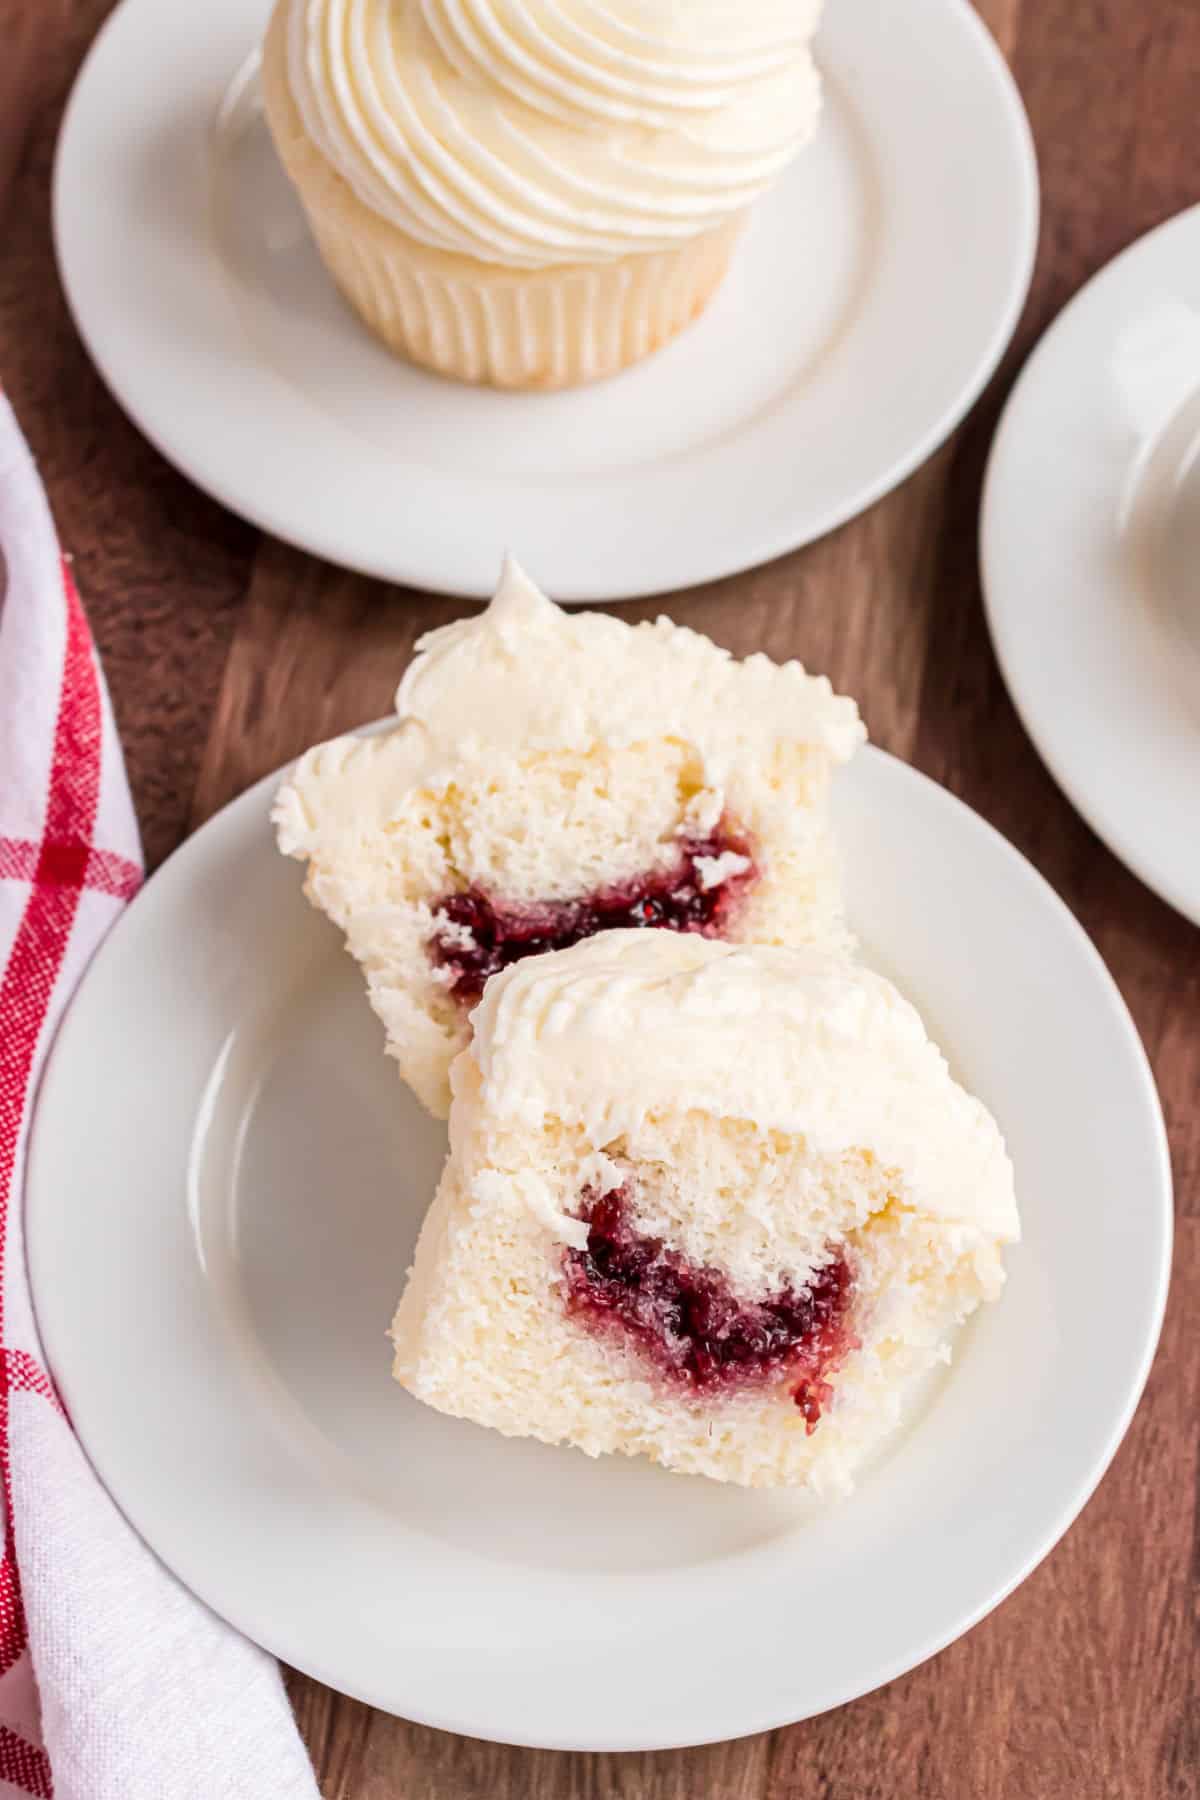 Almond cupcake cut in half with raspberry filling inside.